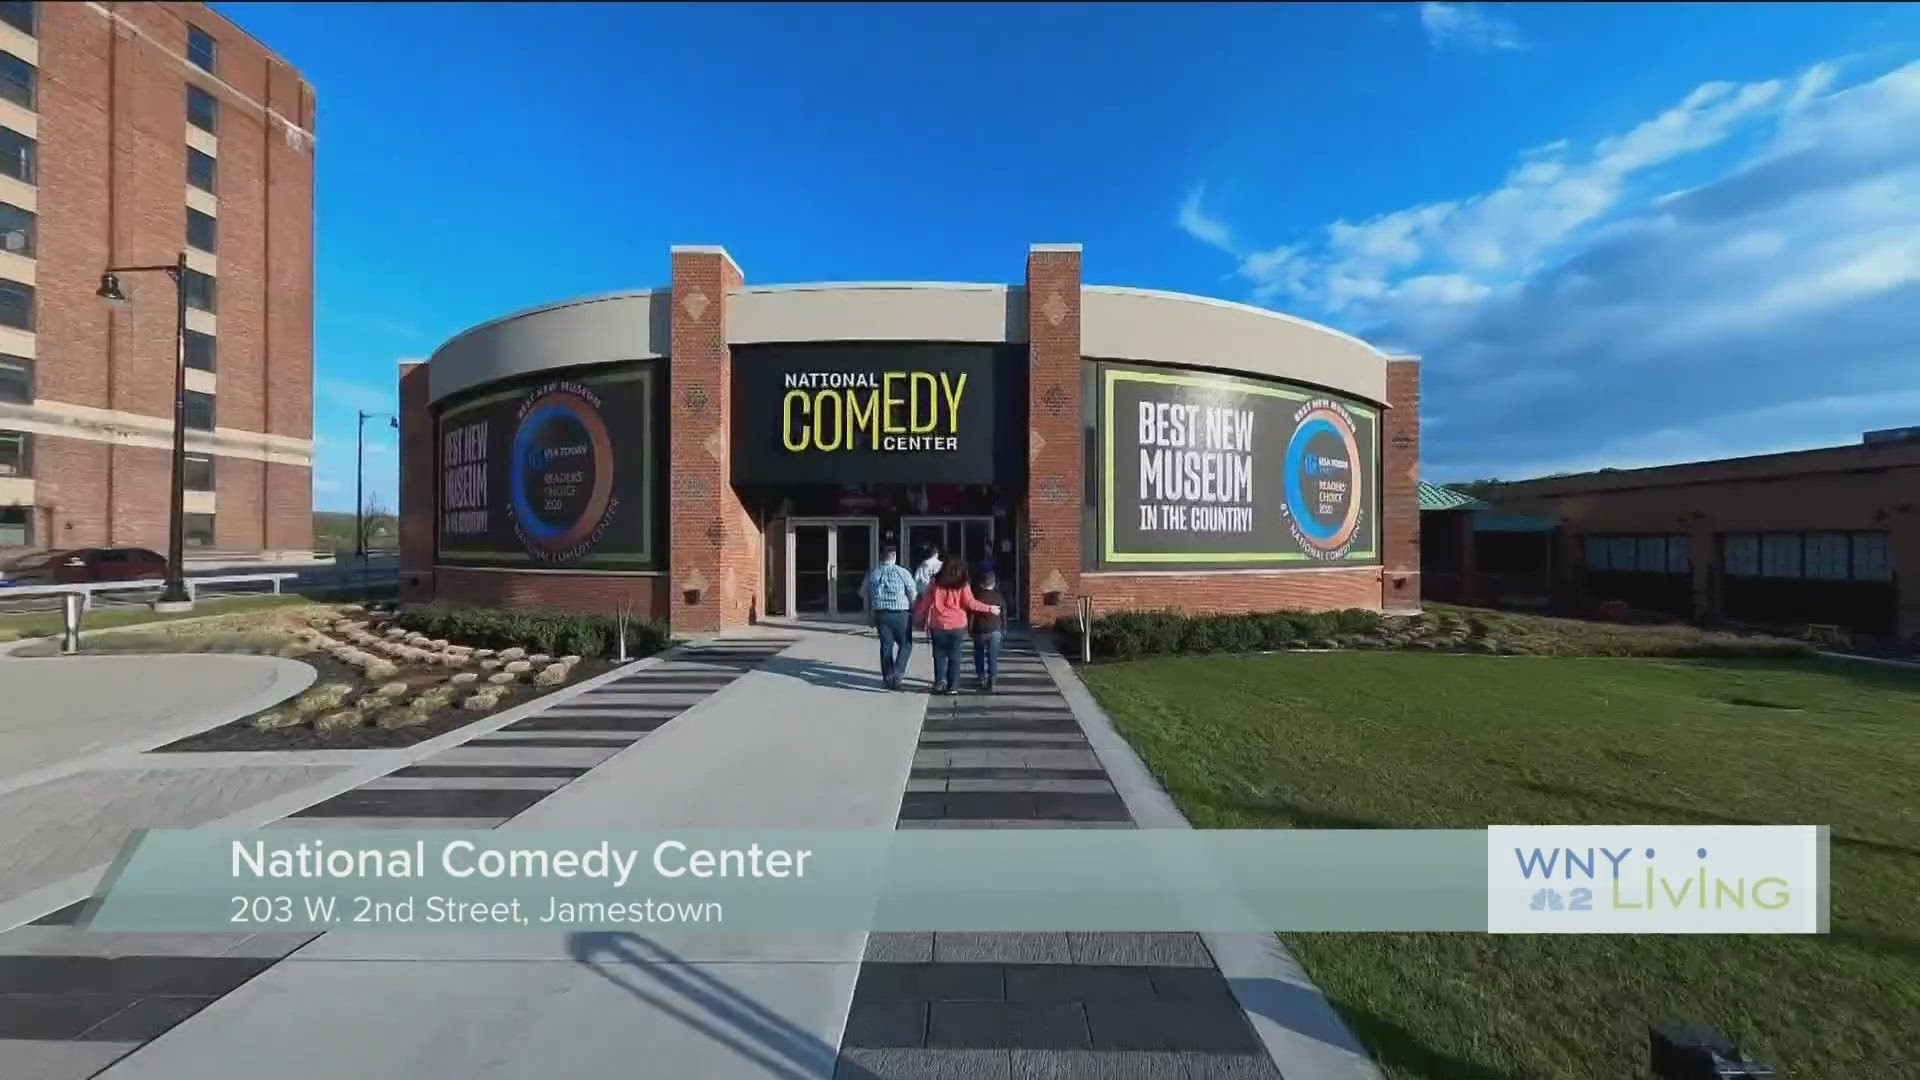 May 20th - WNY Living - National Comedy Center (THIS VIDEO IS SPONSORED BY THE NATIONAL COMEDY CENTER)